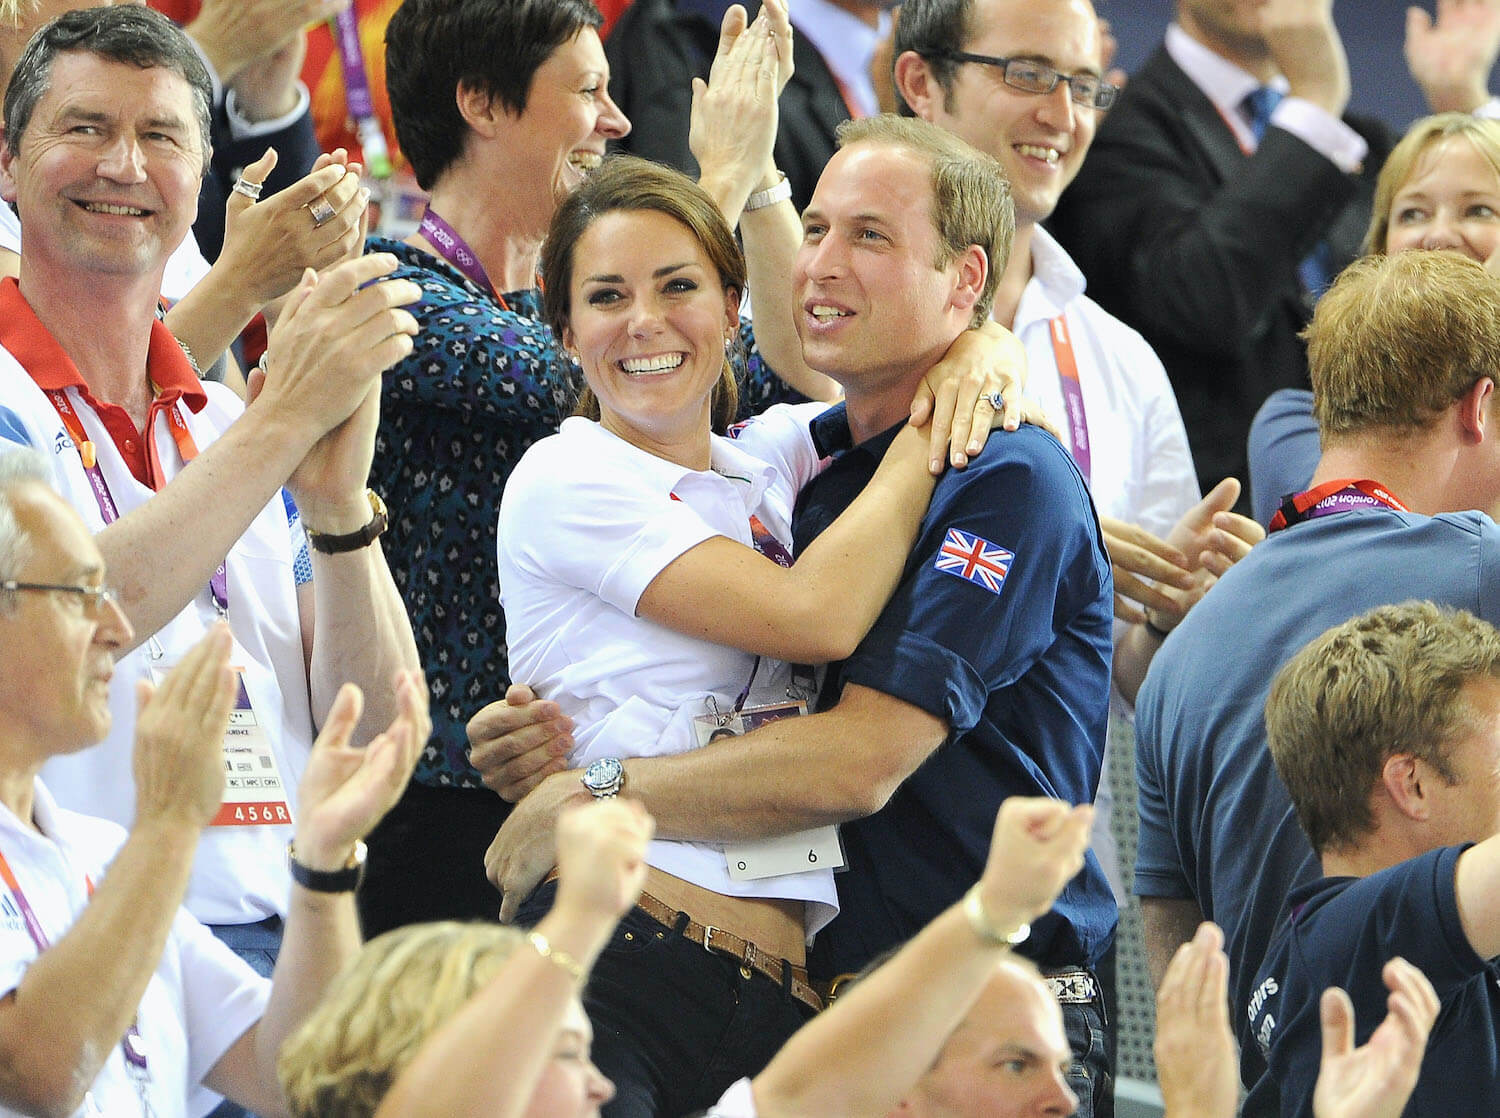 Body Language Expert Points Out Prince William and Kate Middleton’s ‘Most Authentic’ PDA Moment